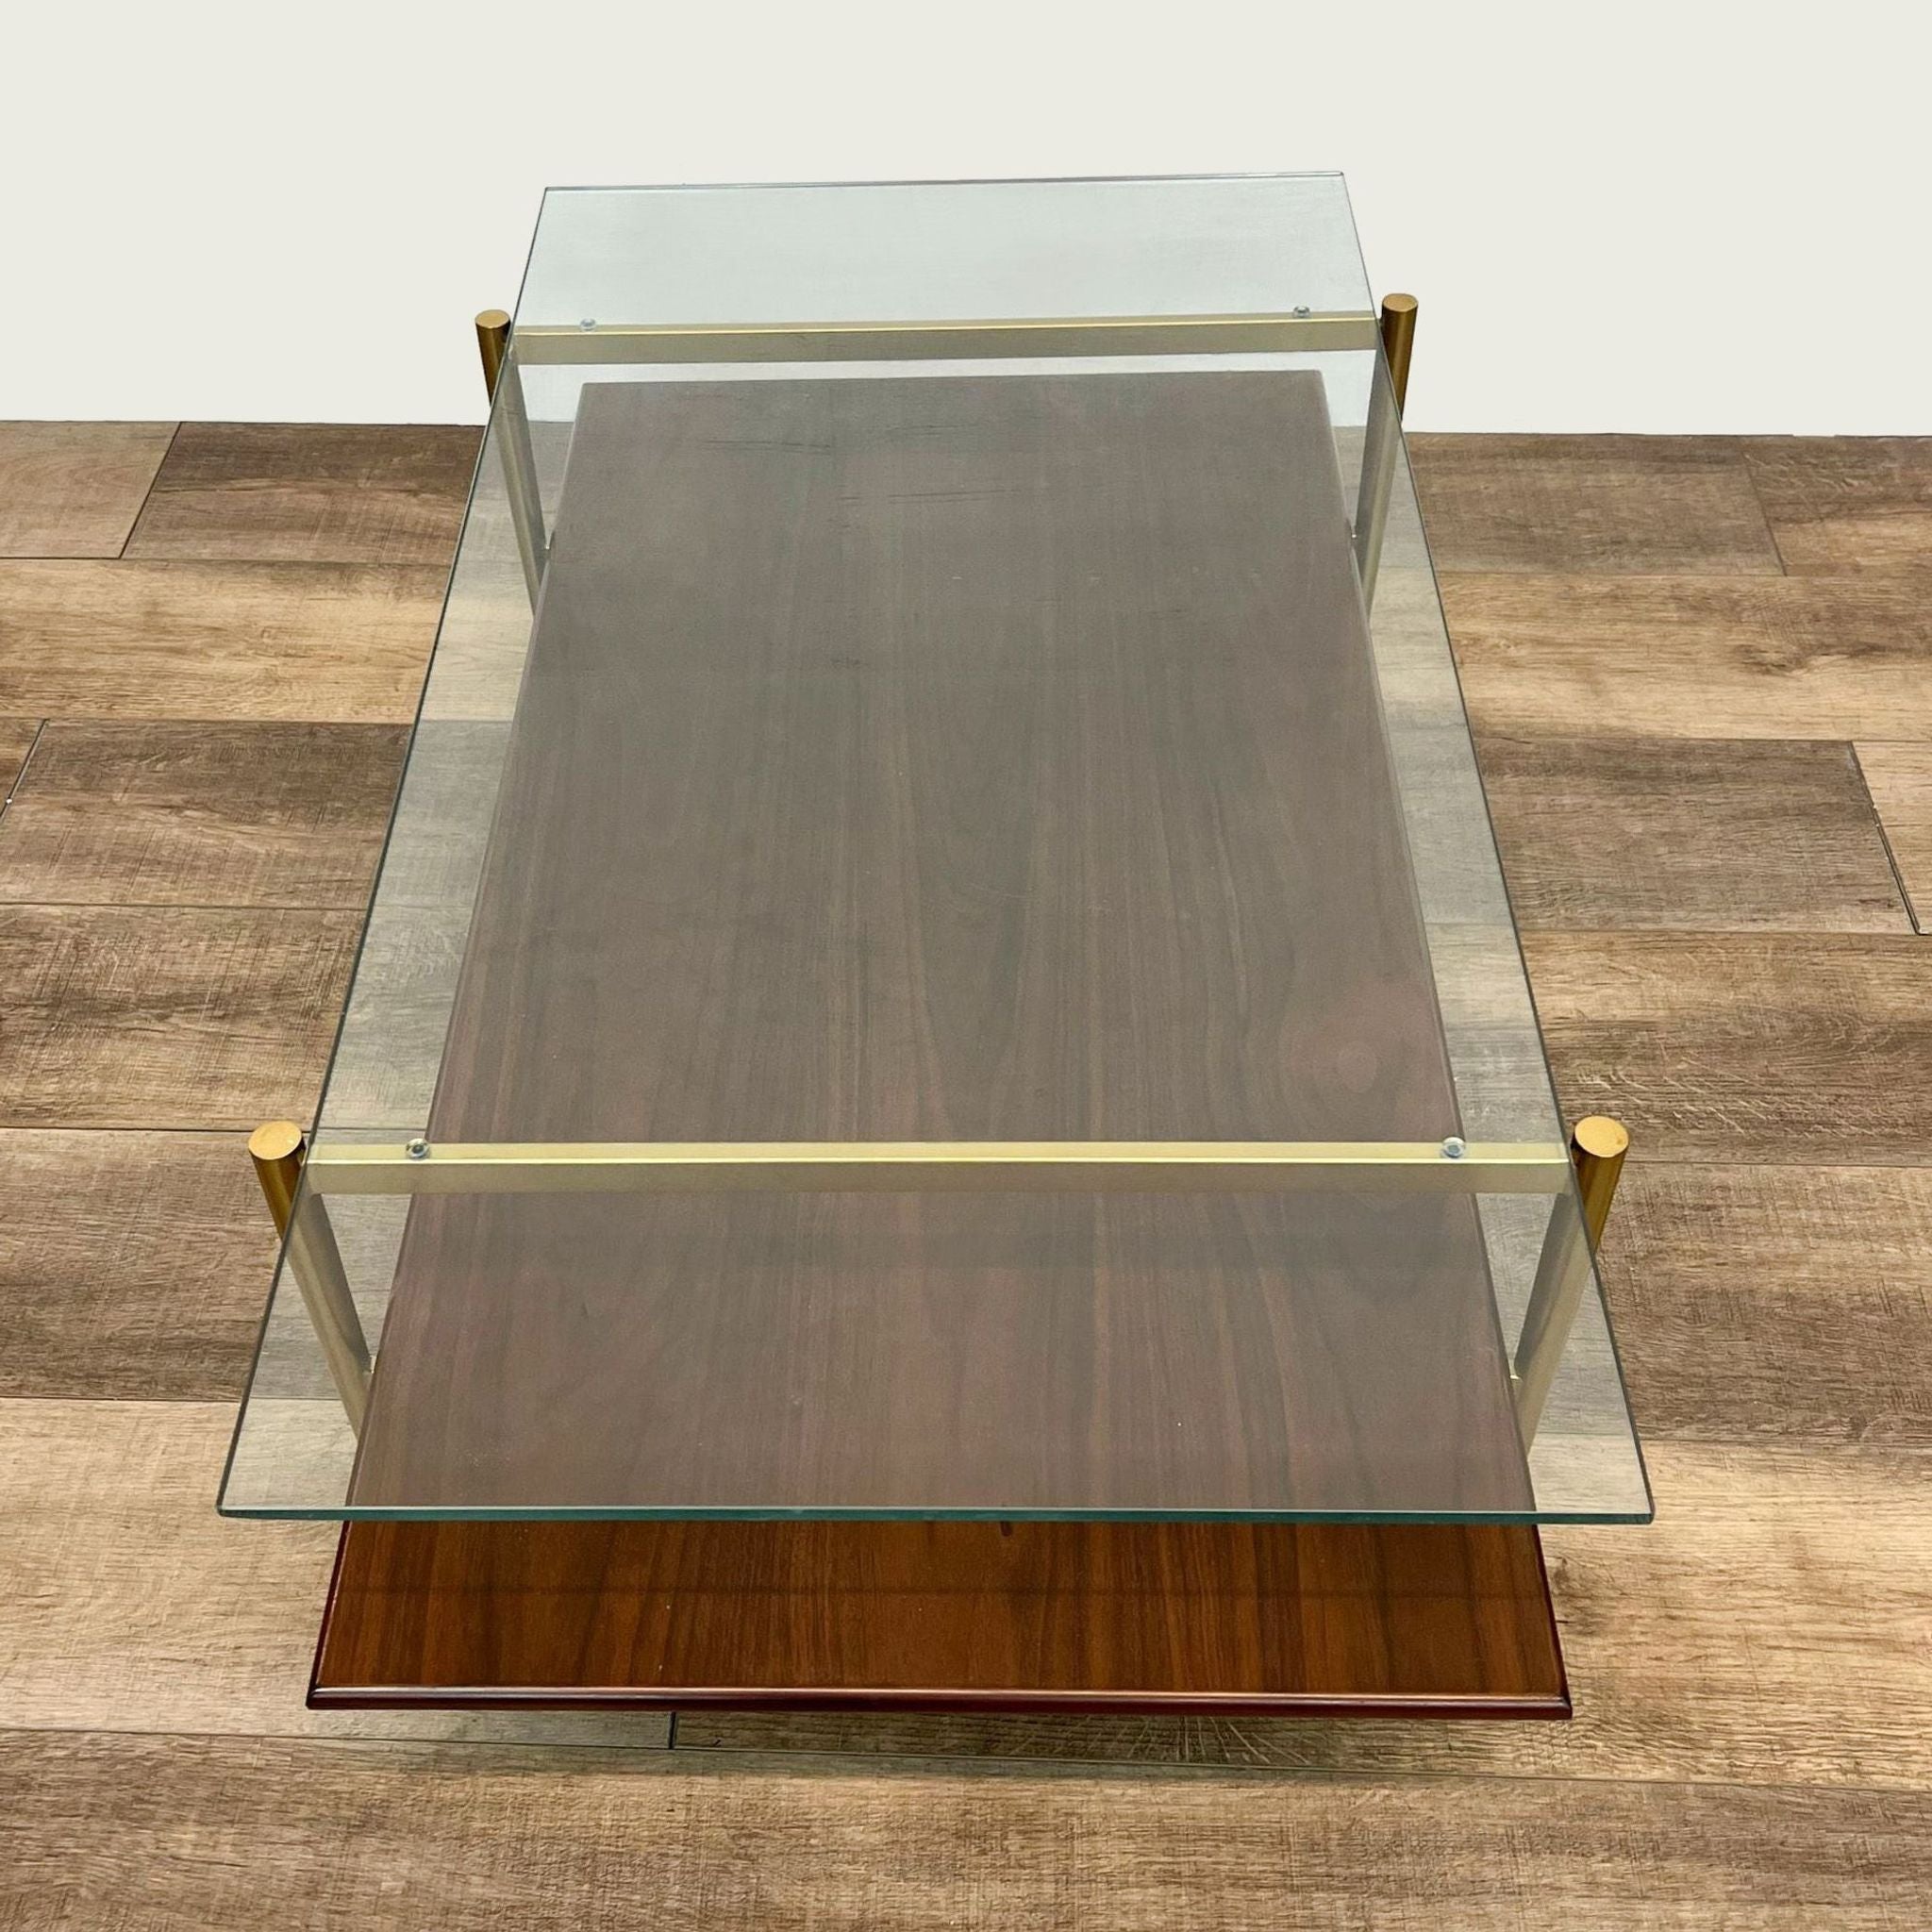 Overhead view of a West Elm/Williams Sonoma two-tier coffee table with a clear glass upper surface and walnut wood underneath.